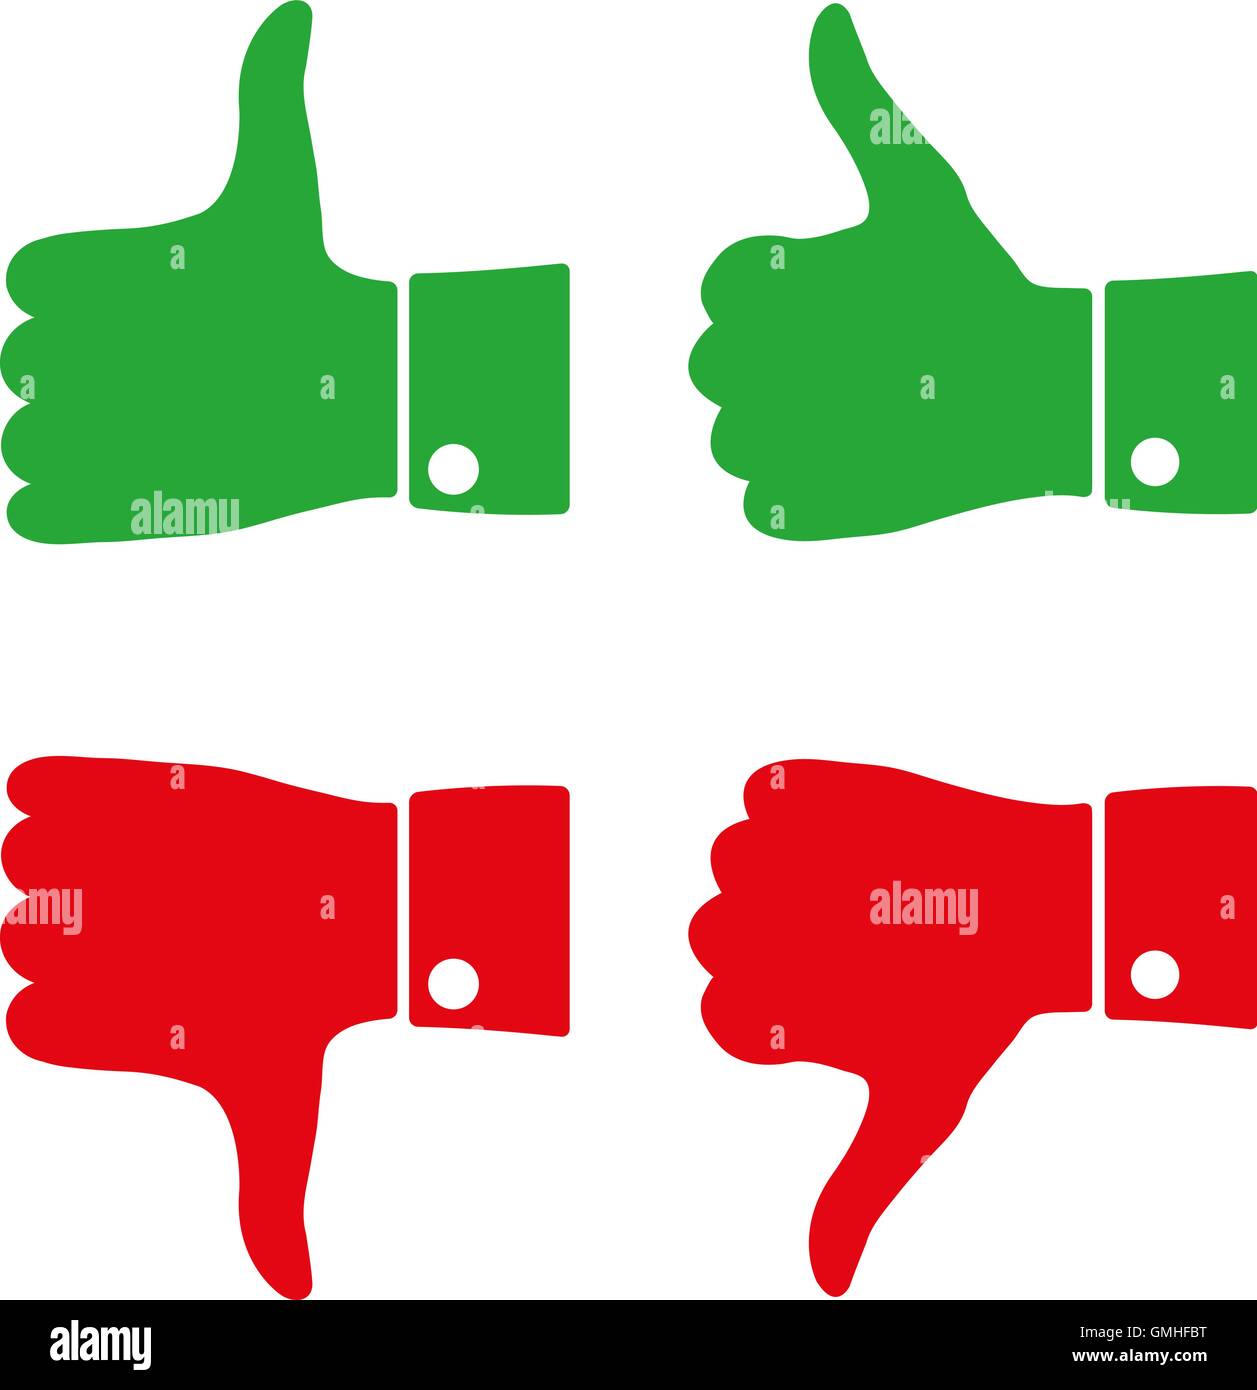 Icons thumbs  up and down, vector illustration Stock Vector